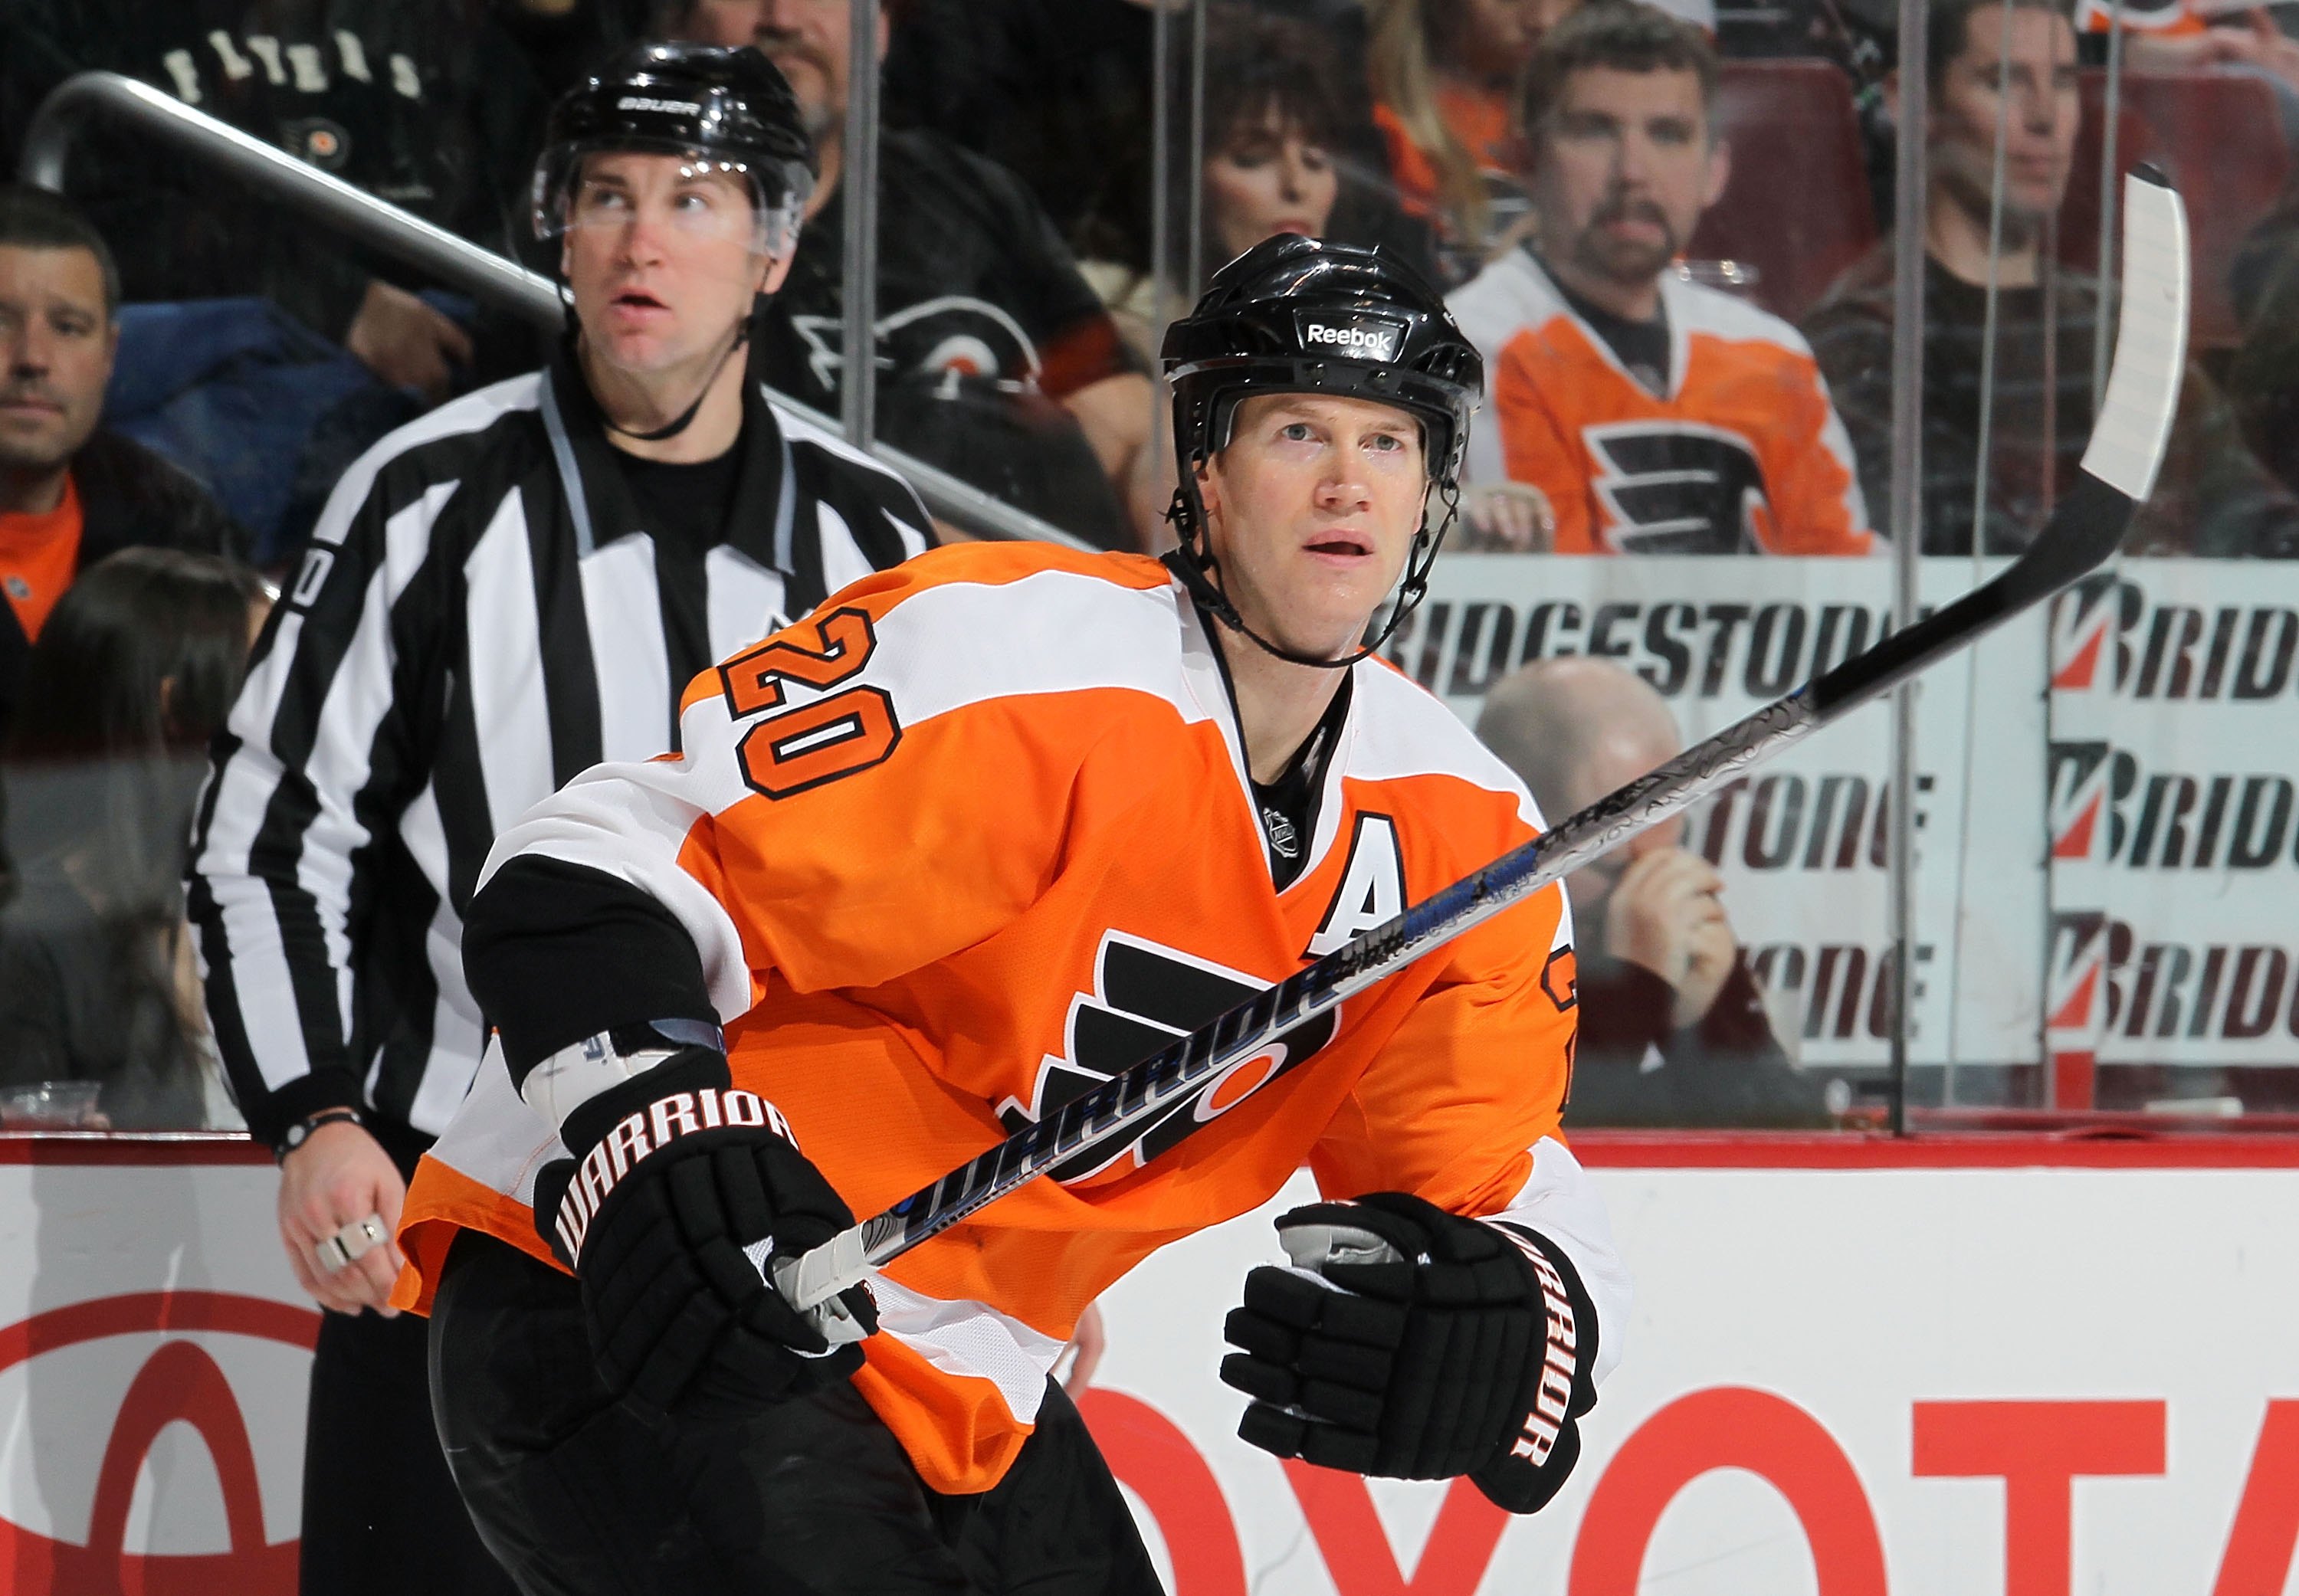 Chris Pronger injury: Flyers star 'is never going to play again